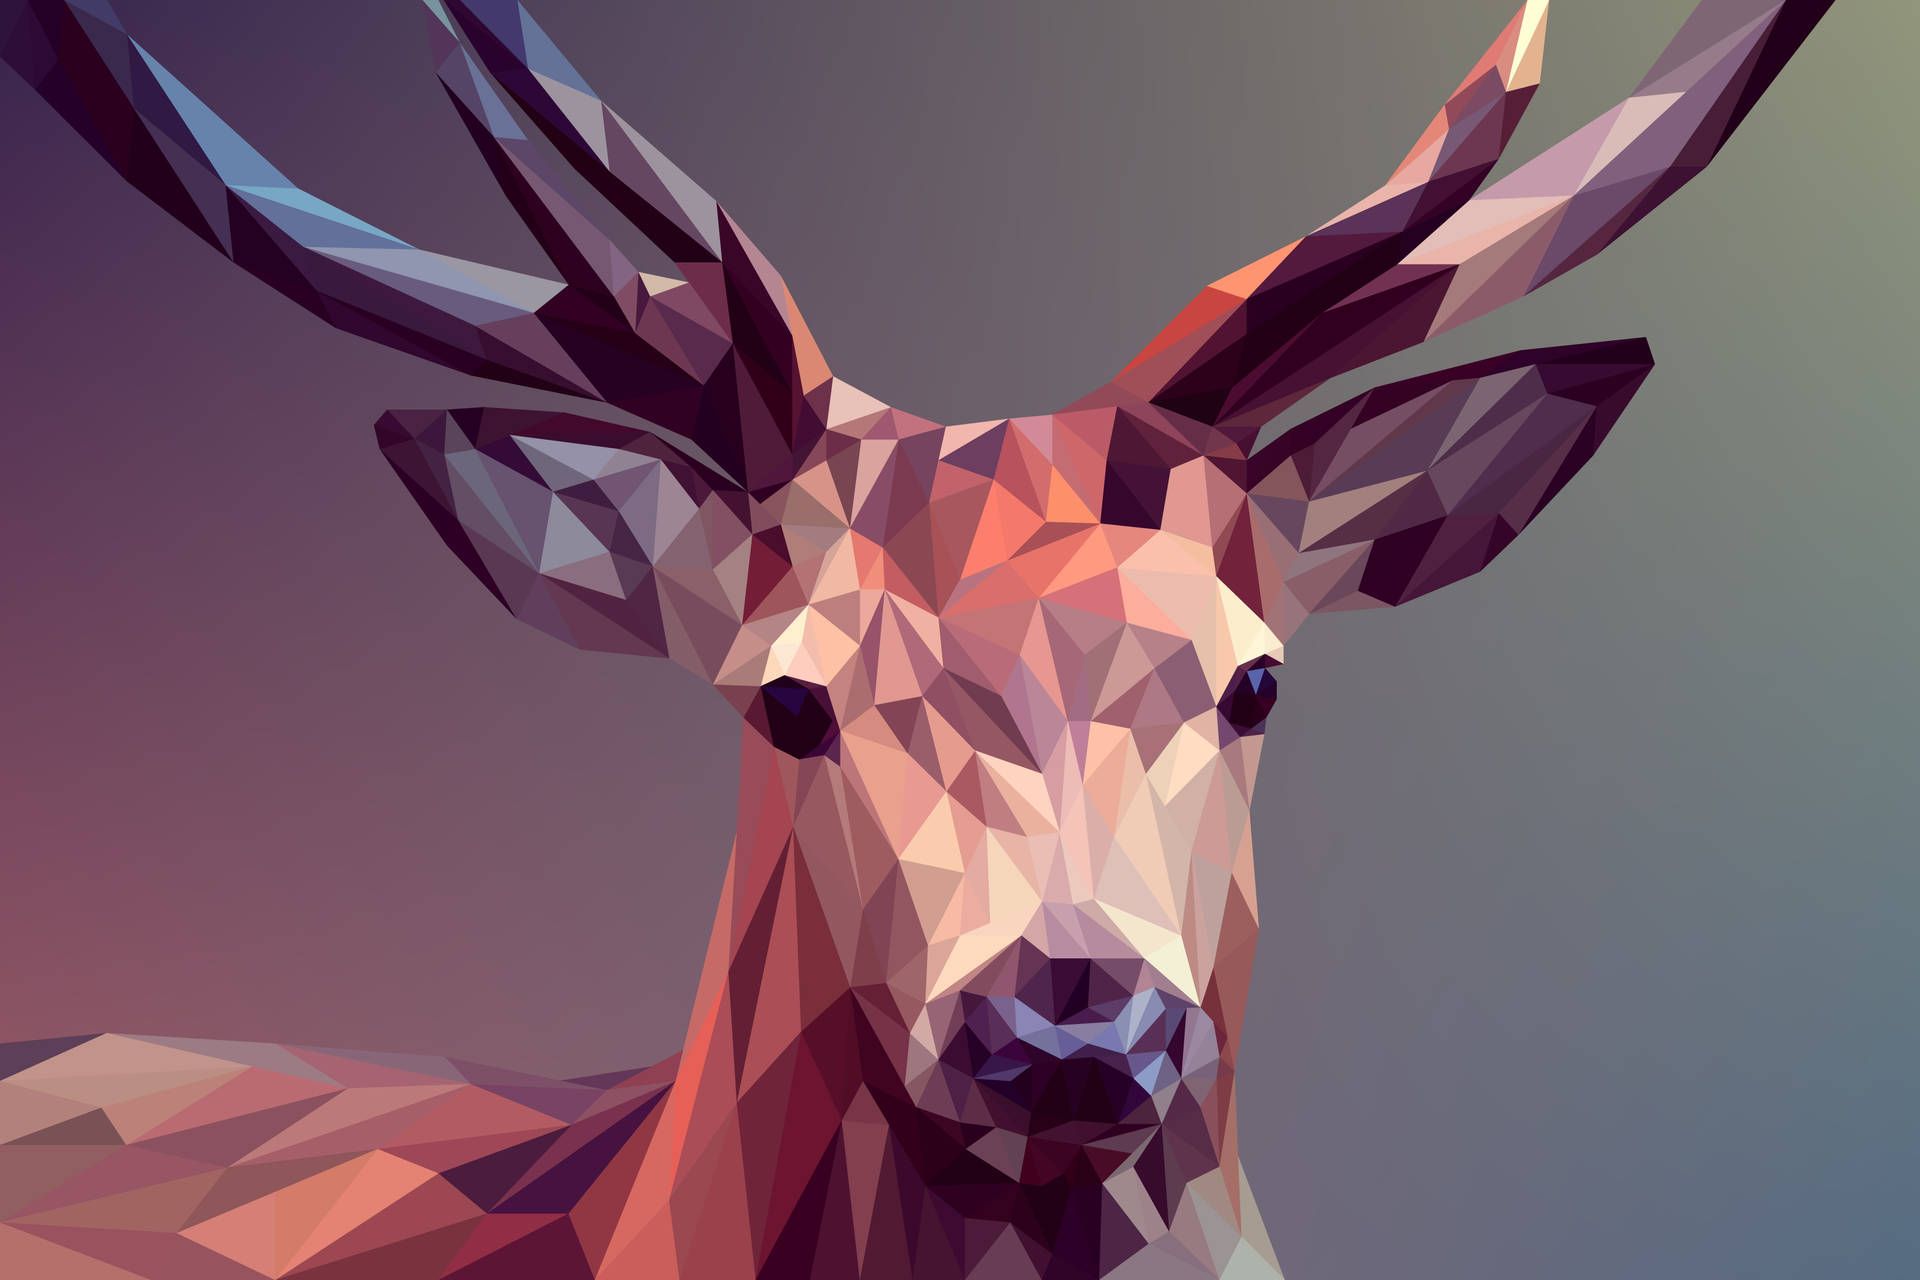 A deer with large antlers on a gradient background - Low poly